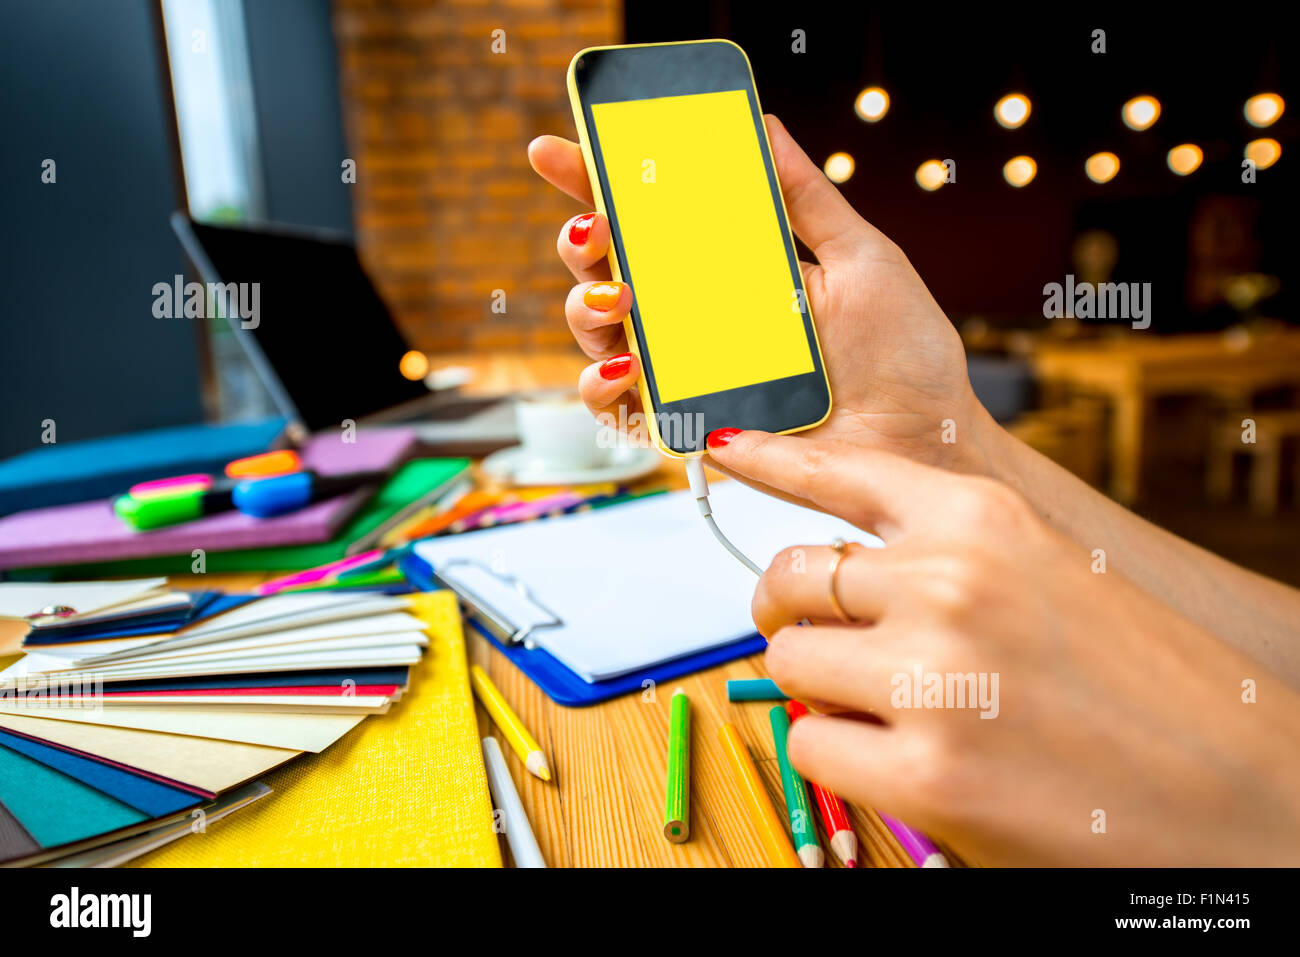 Smart phone with empty screen on colorful working space background Stock Photo